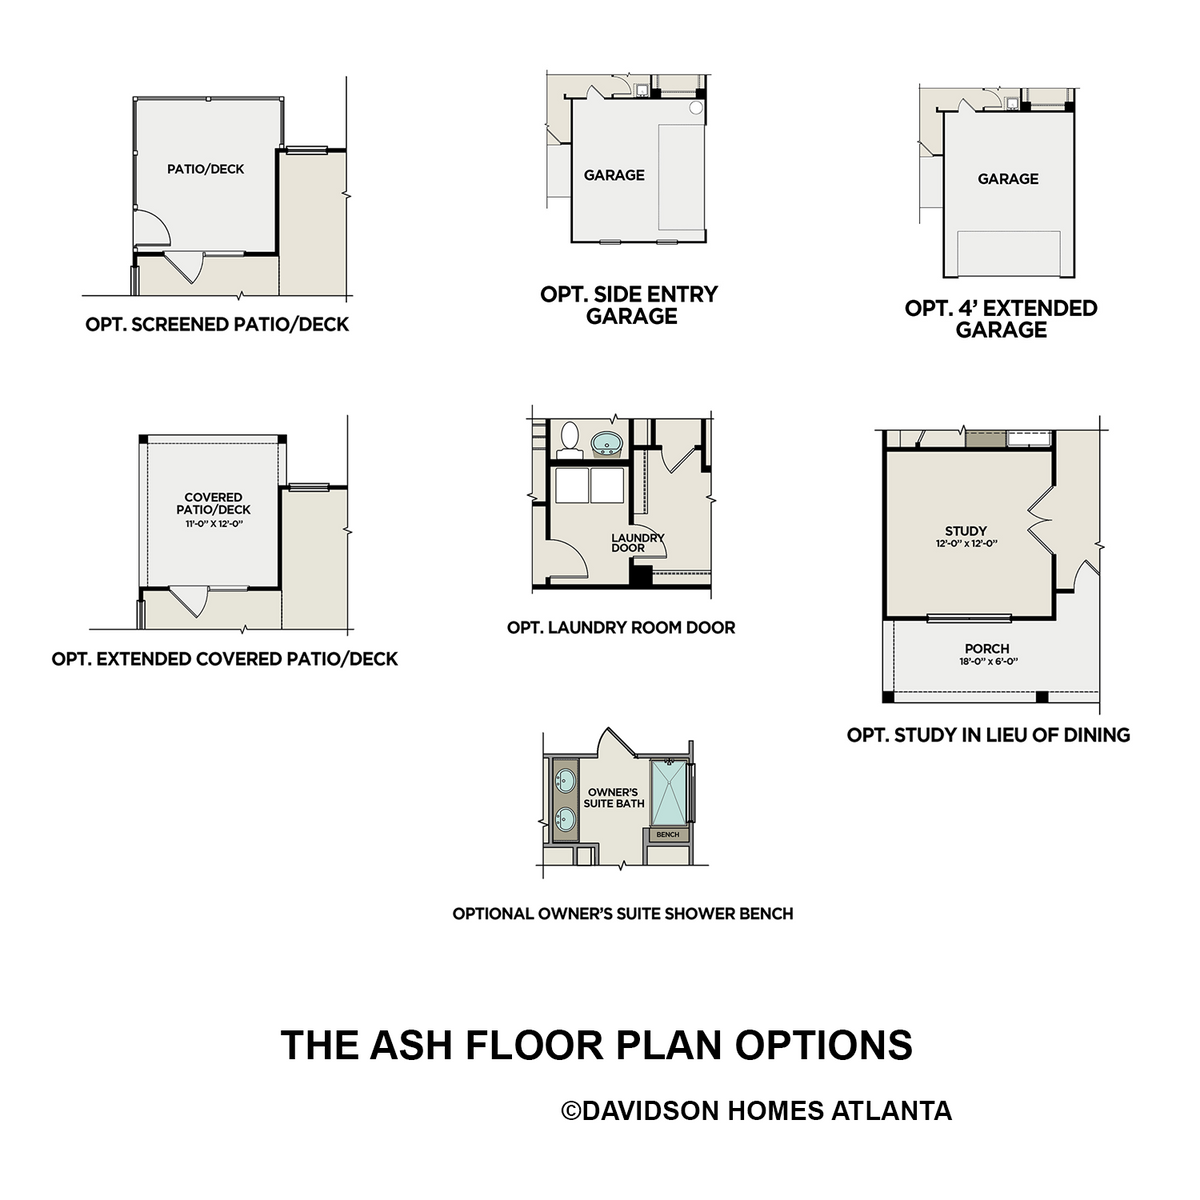 3 - The Ash A floor plan layout for 25 Ridgeline Way in Davidson Homes' Mountainbrook community.